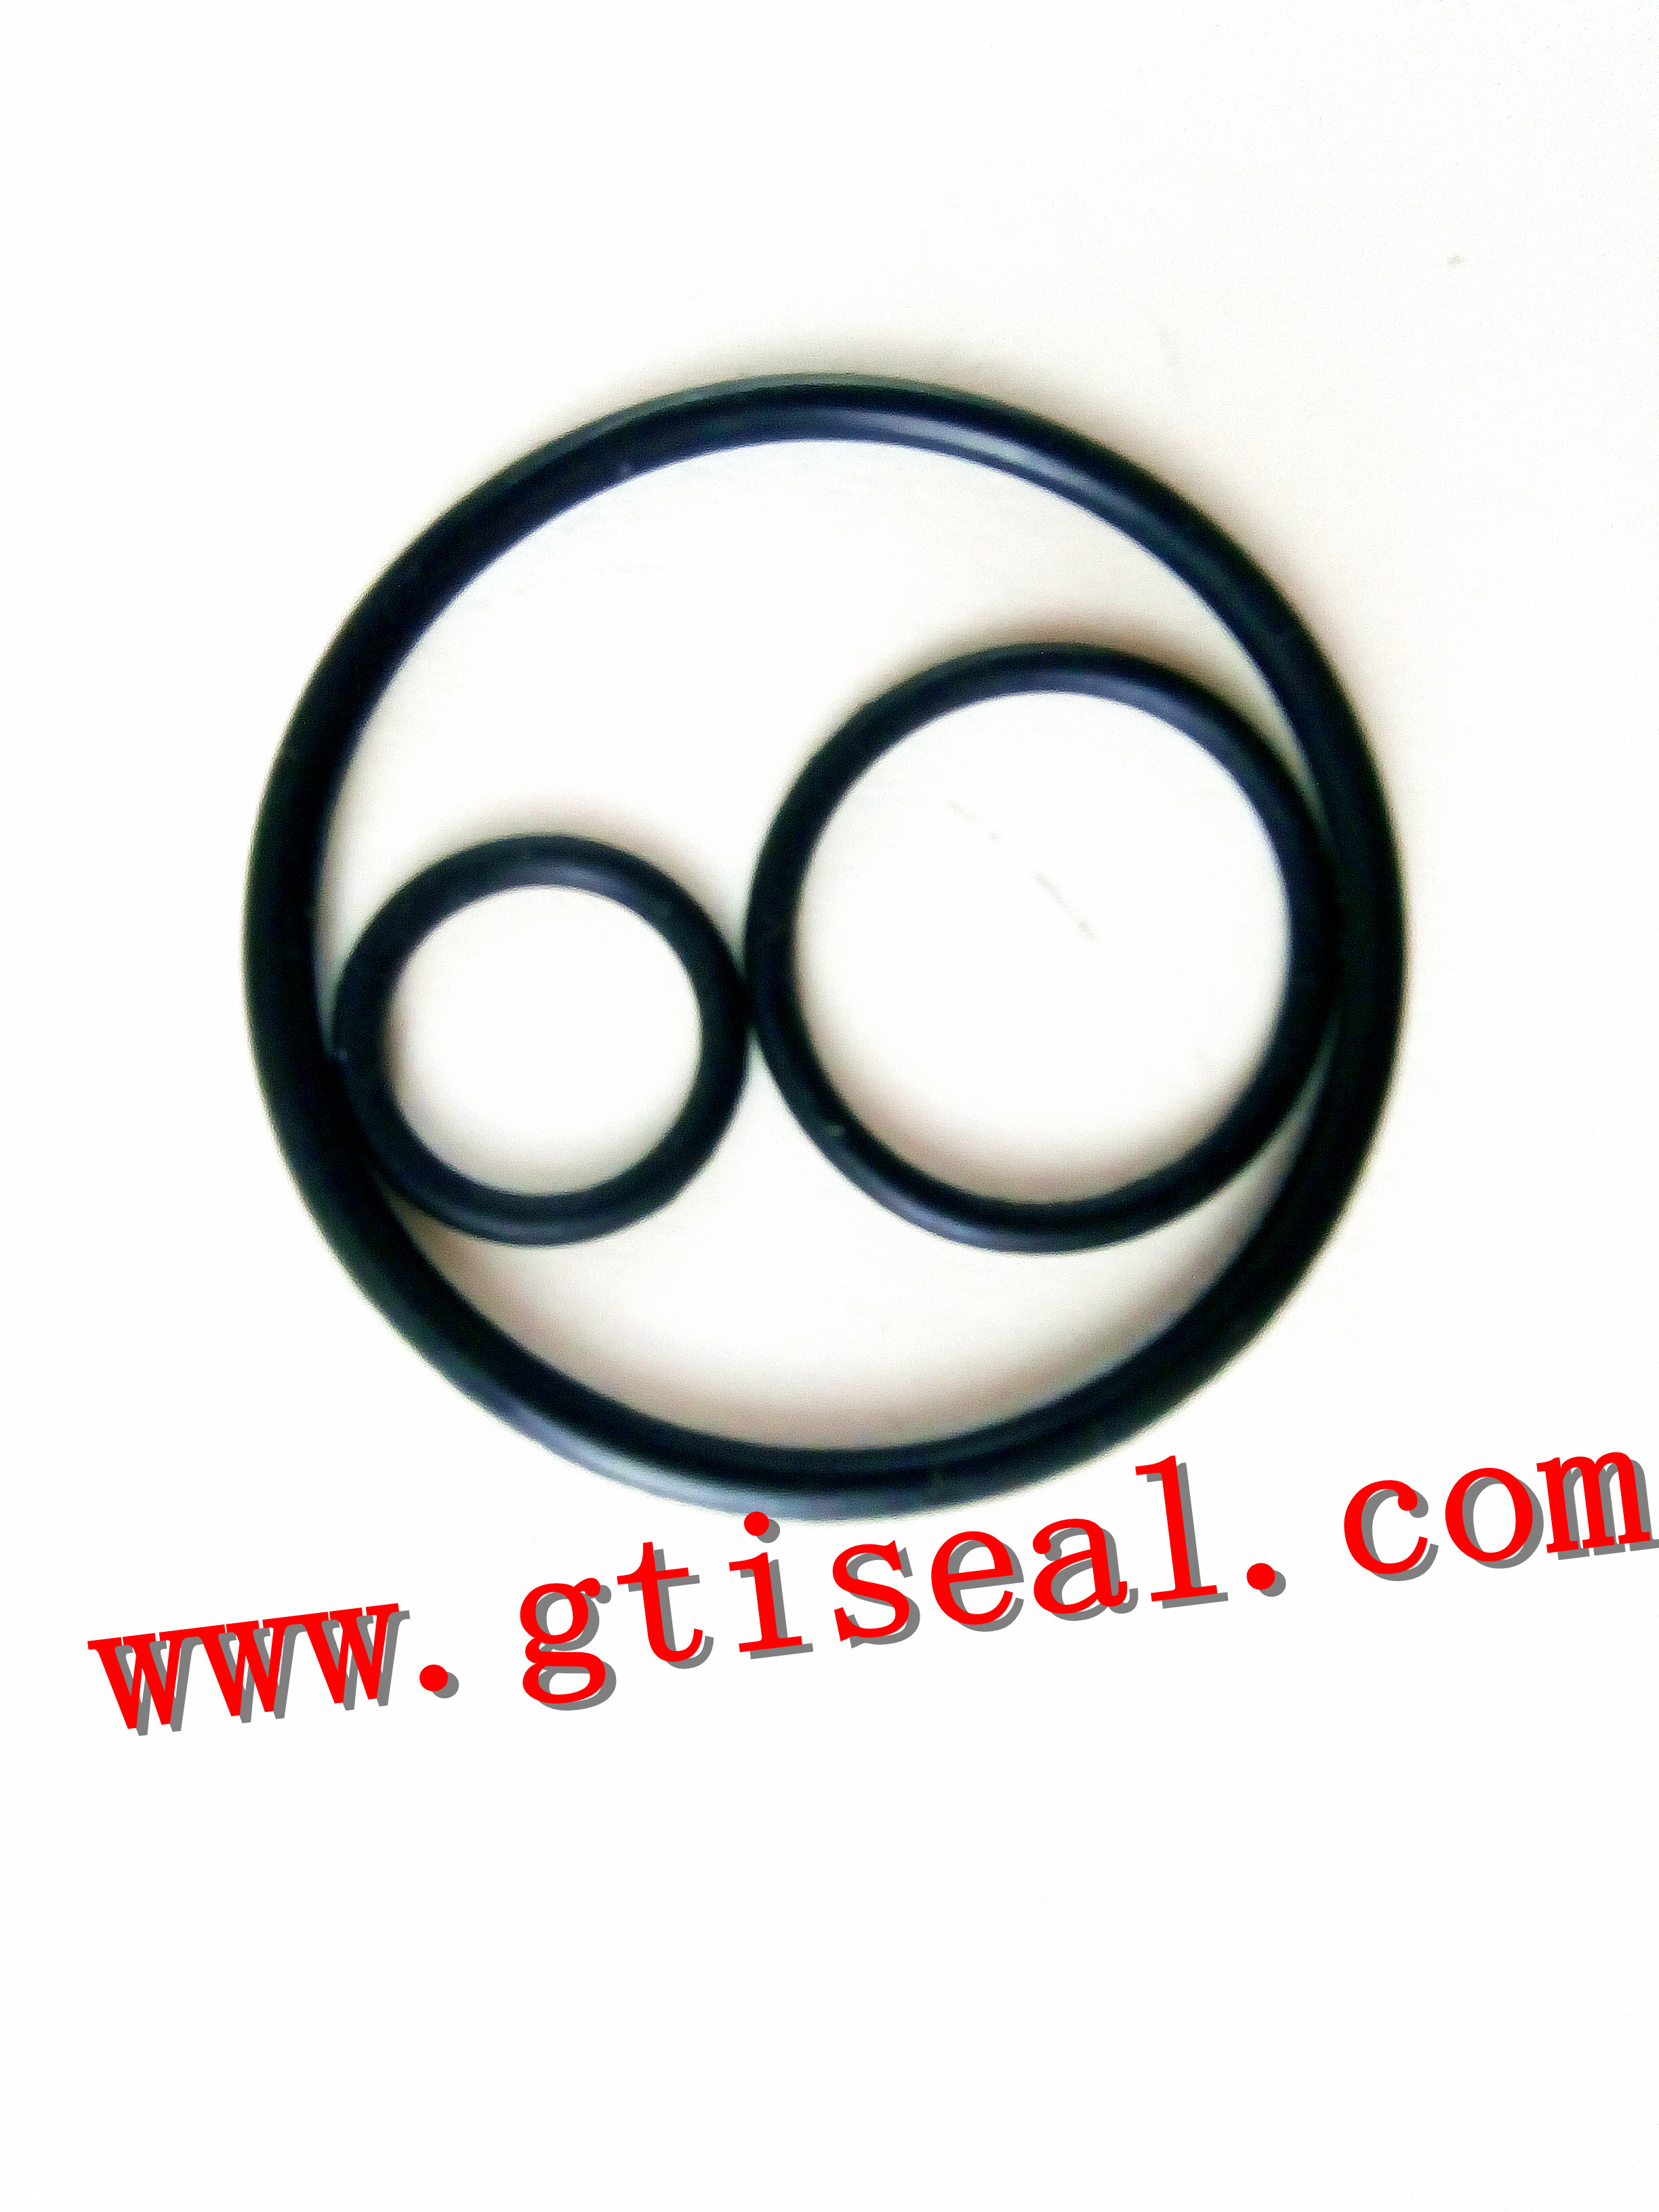 Nonstandard and Standard Chemical Resistance Rubber O Ring Seals